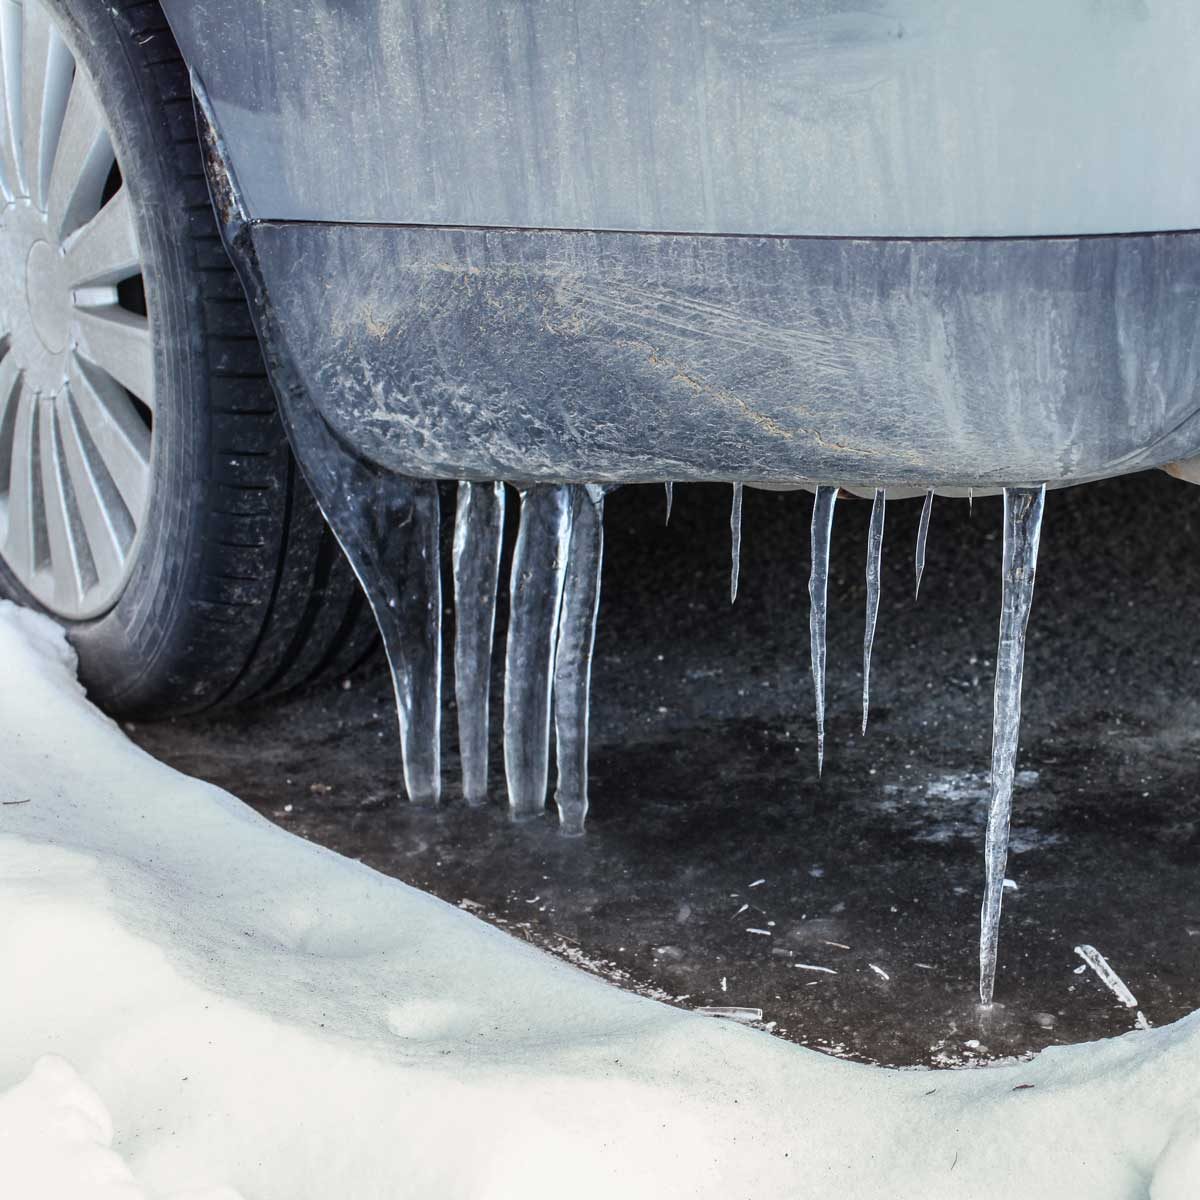 20 Things You Should Never Leave in Your Car During Winter